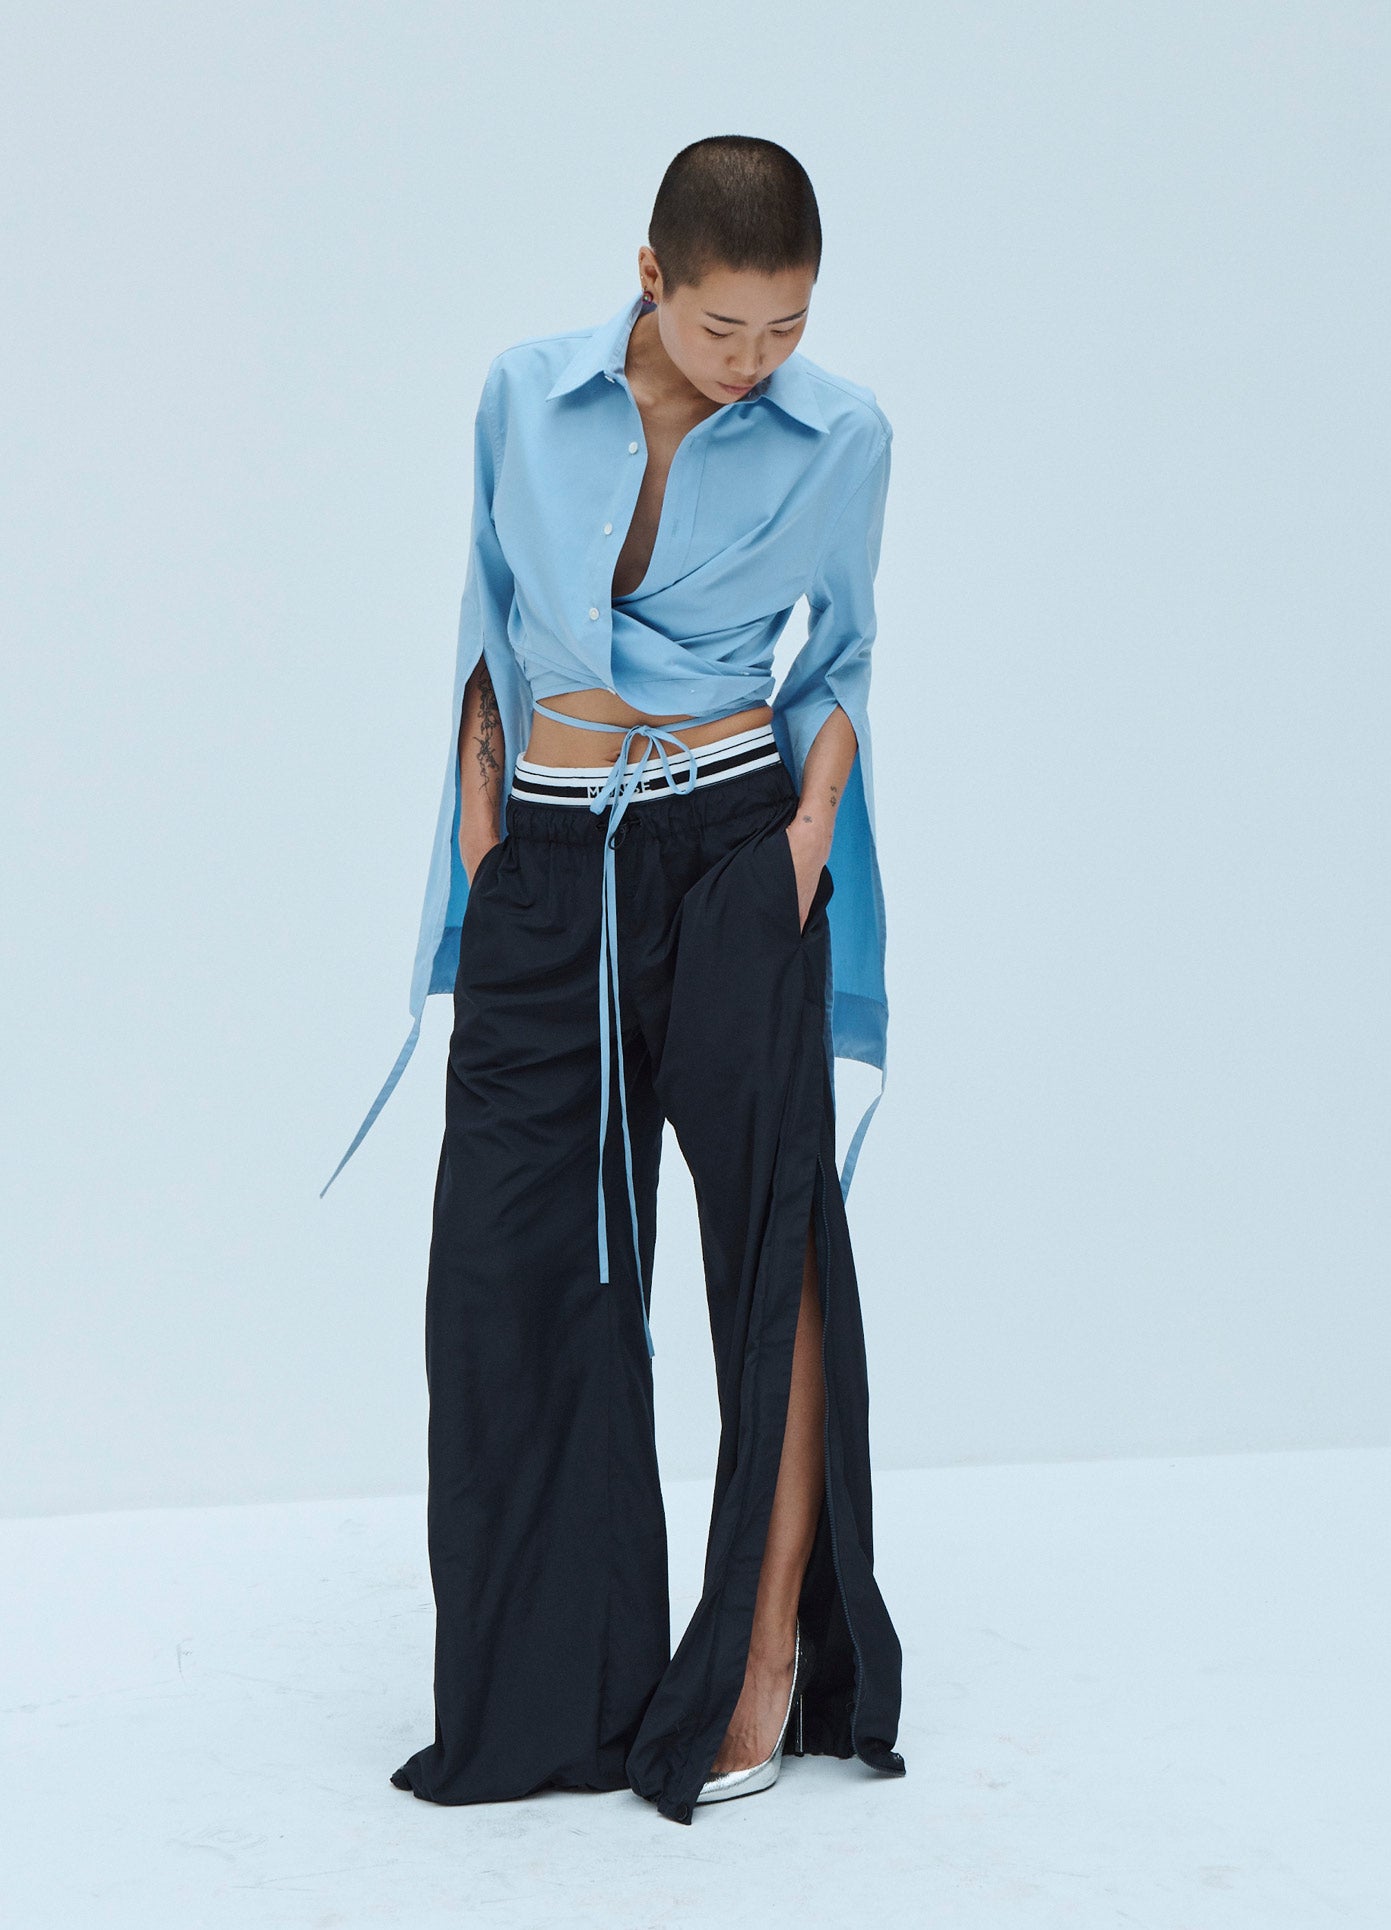 MONSE Techno Waistband Detail Parachute Pant in Black on Model Looking Down Front View